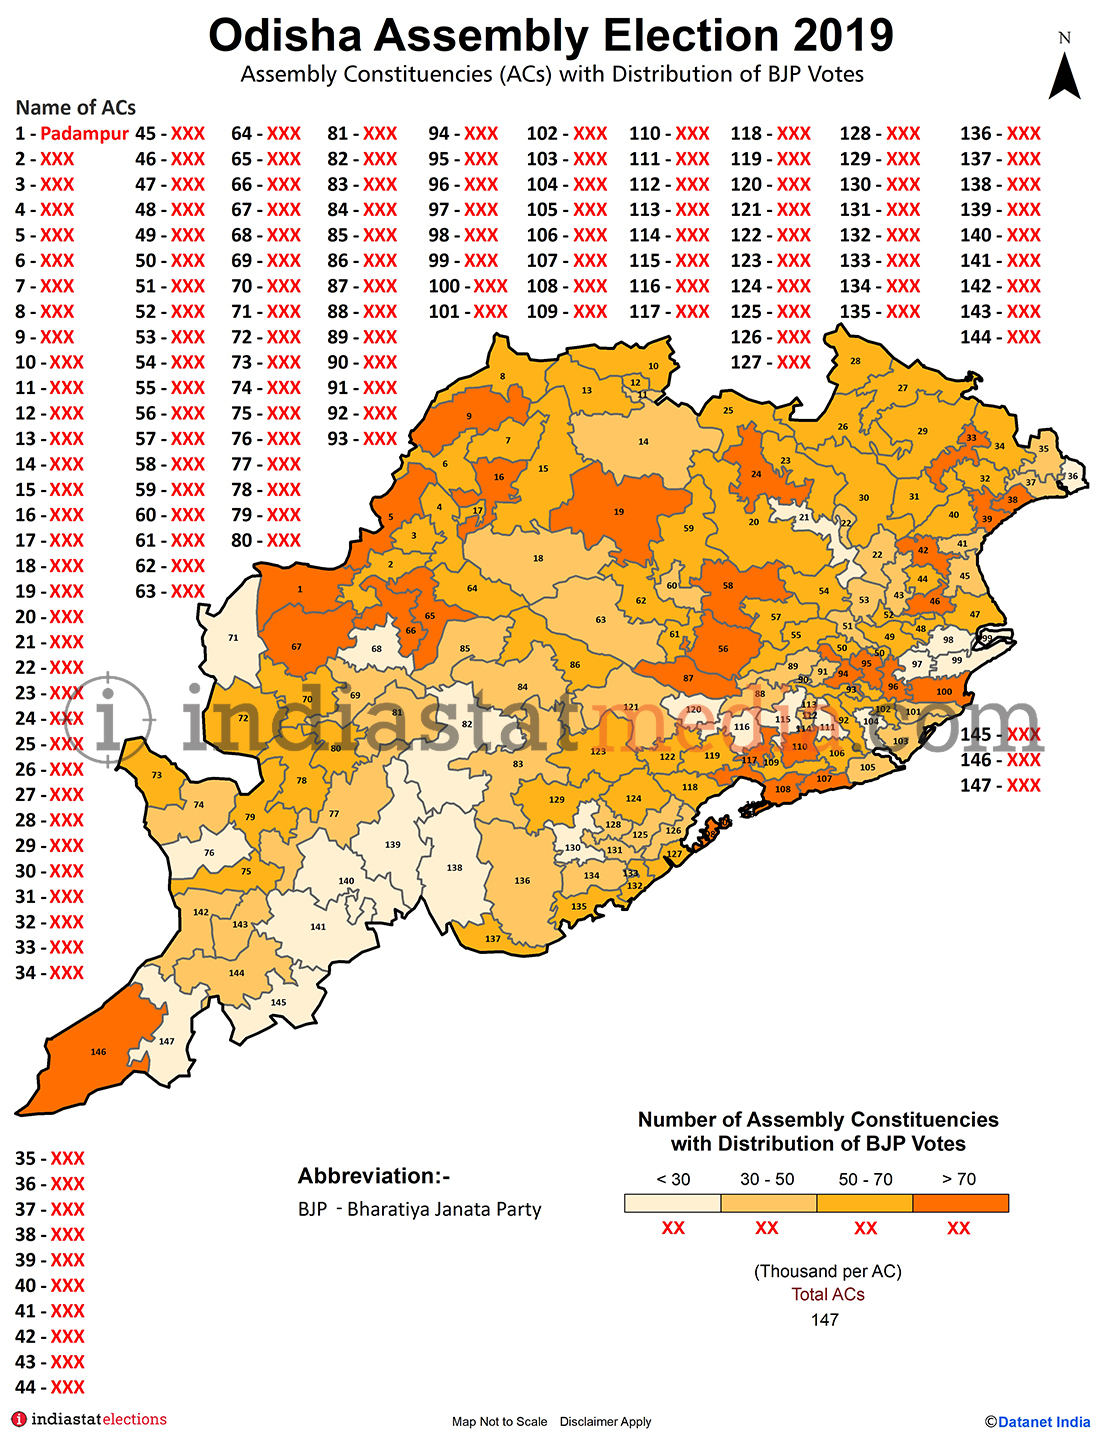 Distribution of BJP Votes by Constituencies in Odisha (Assembly Election - 2019)